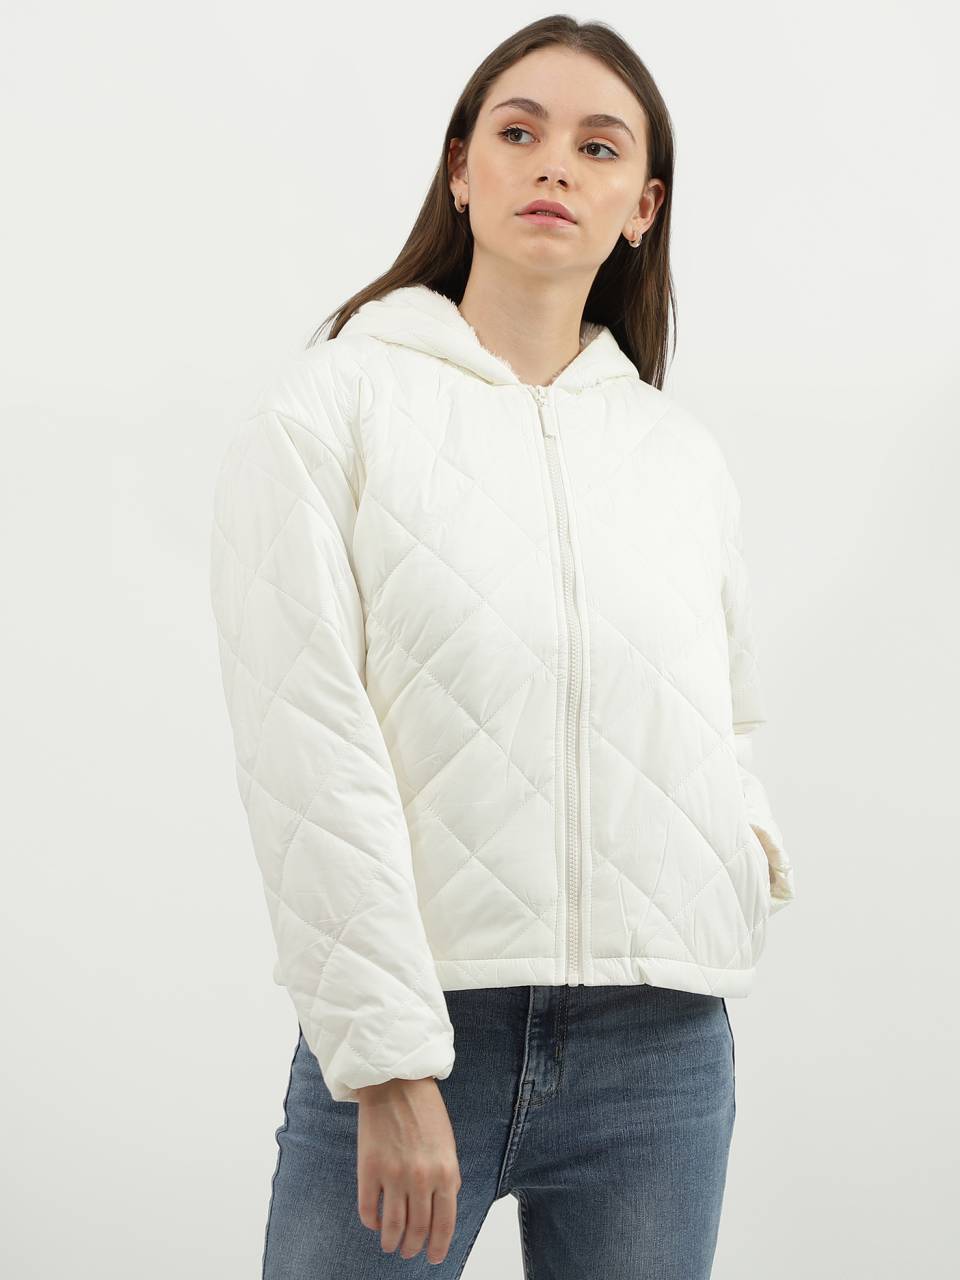 Women's Jackets and Coats Collection 2021 | Benetton